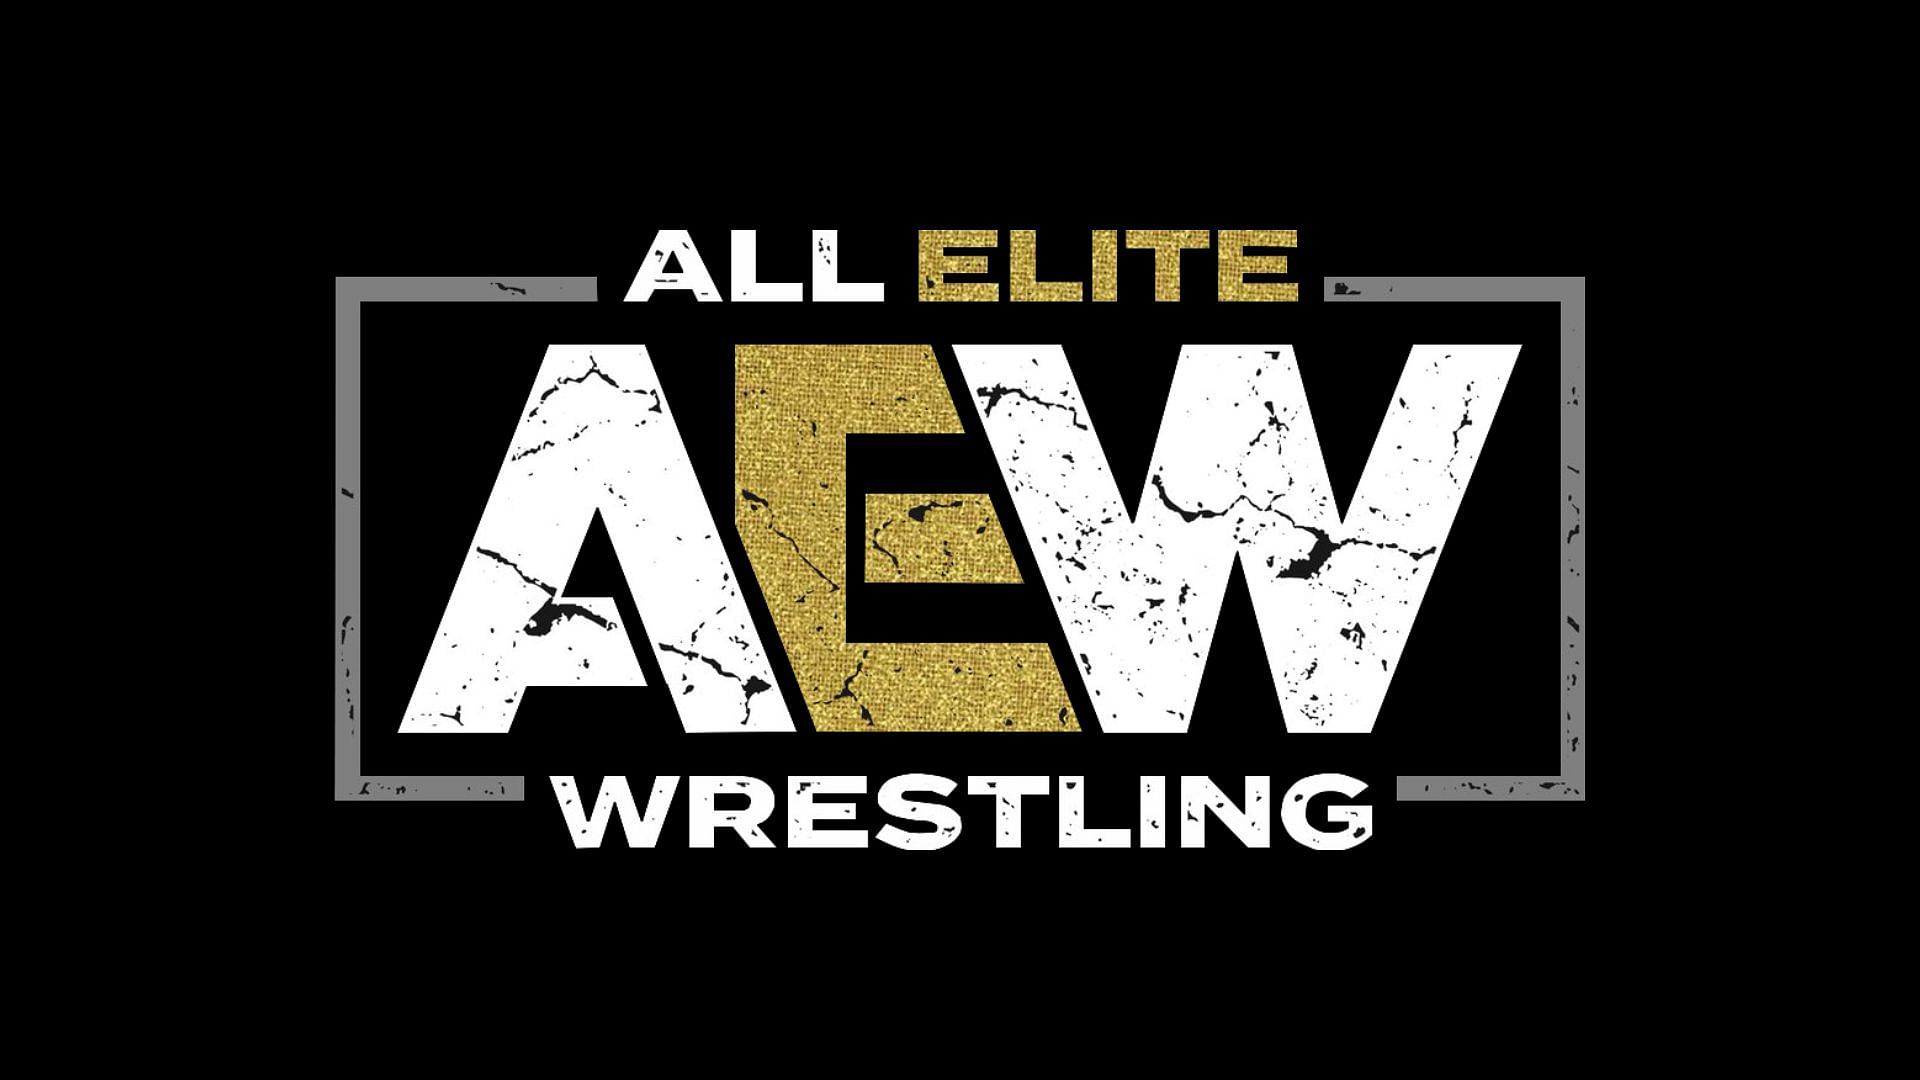 Could this star join his brother in AEW?